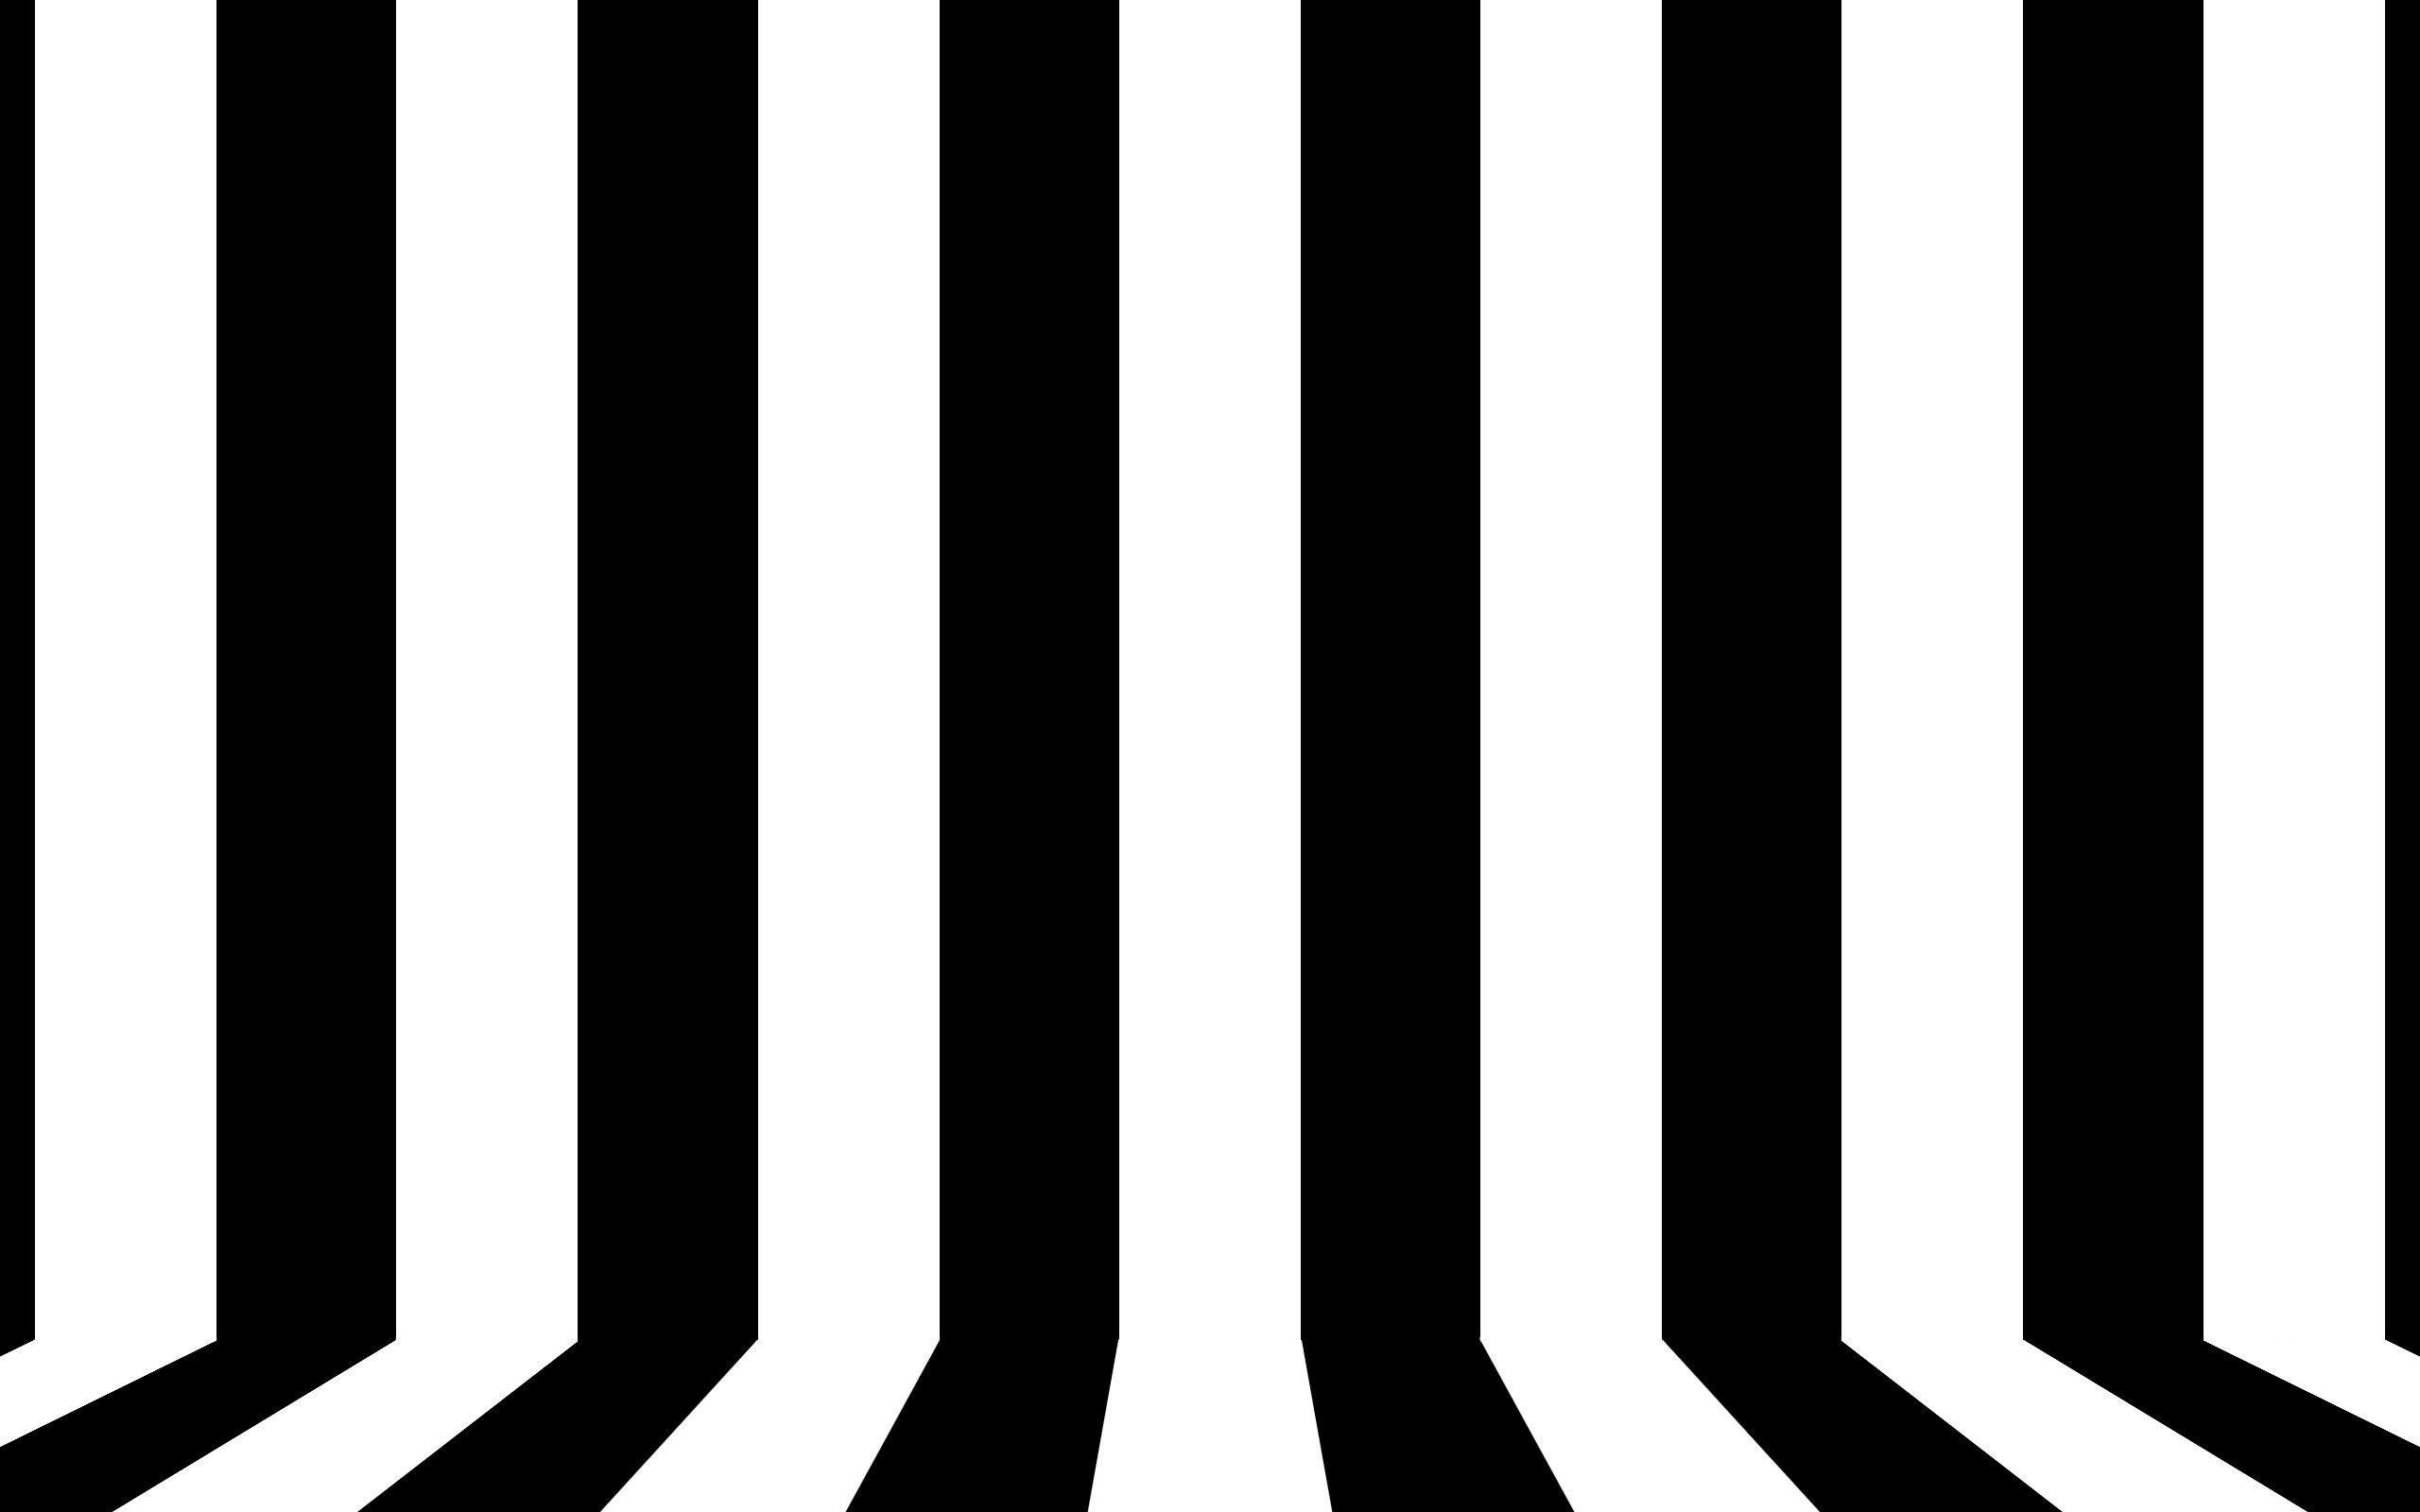 Black and White Lines Wallpaper Free Black and White Lines Background